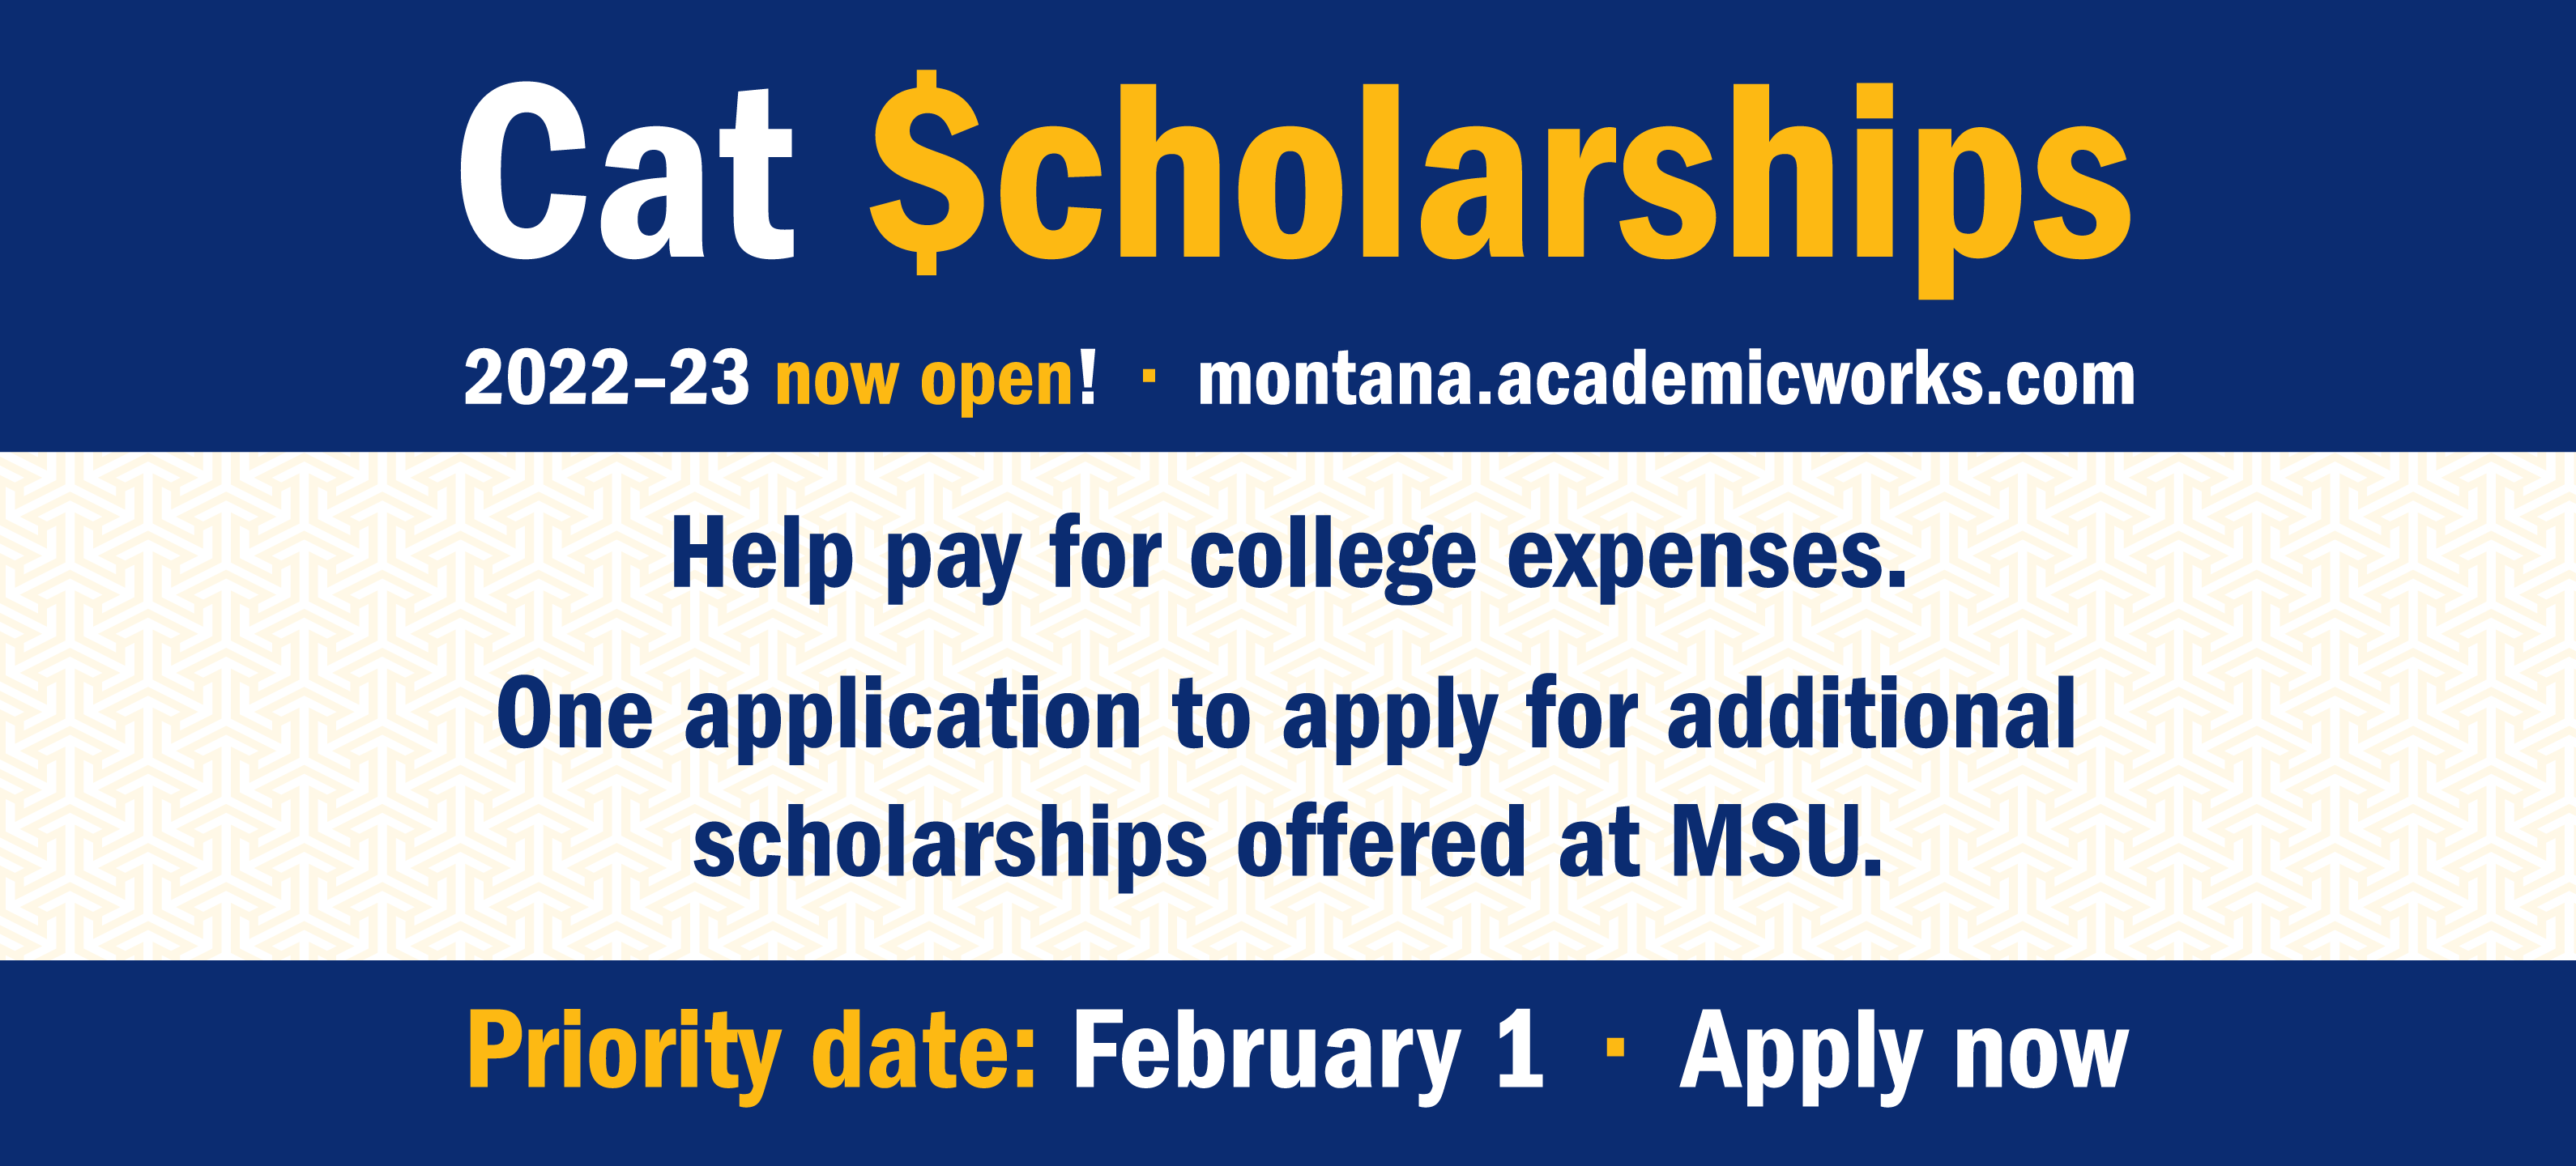 Help pay for college expenses. One application to apply for additional scholarships offered at MSU.
Priority date: February 1 * Apply now